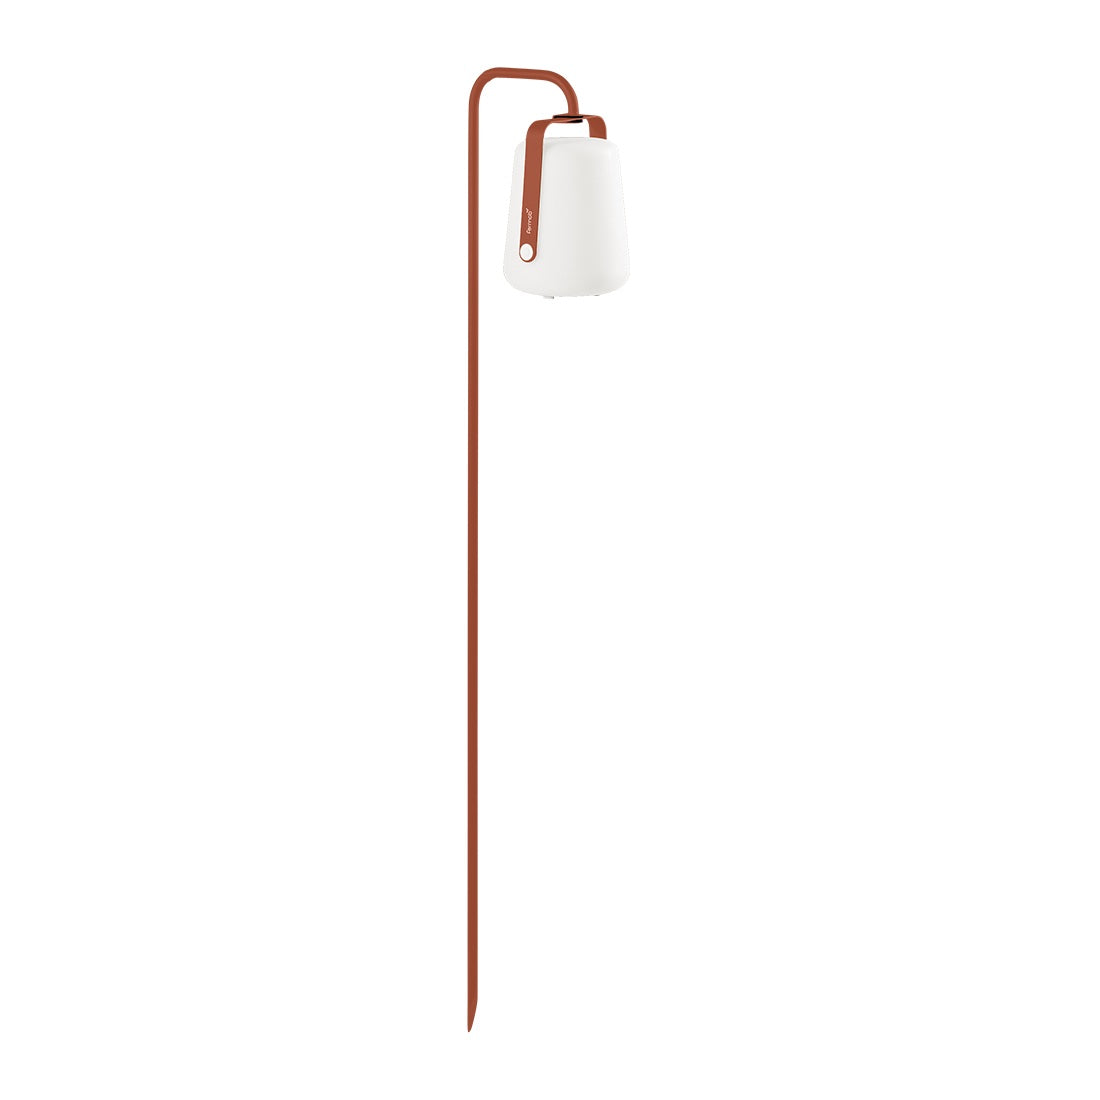 Fermob Balad Spike Stand in Red Ochre with a Fermob Lamp in Red ochre attached.